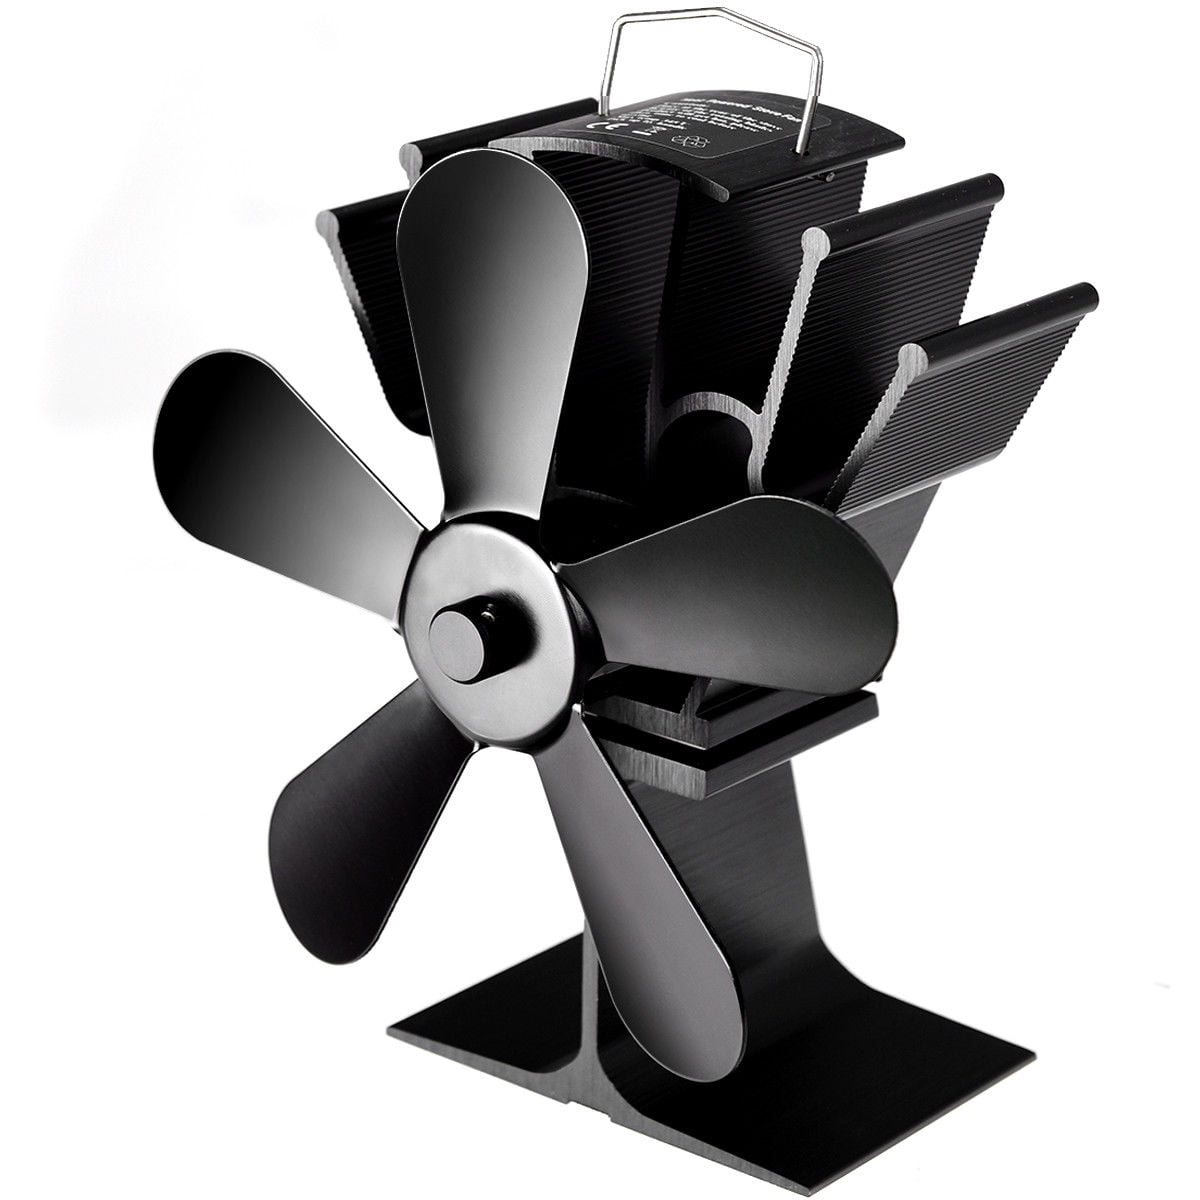 4 Blades Heat Powered Fireplace Stove Fan for Wood Burner Eco Friendly Black